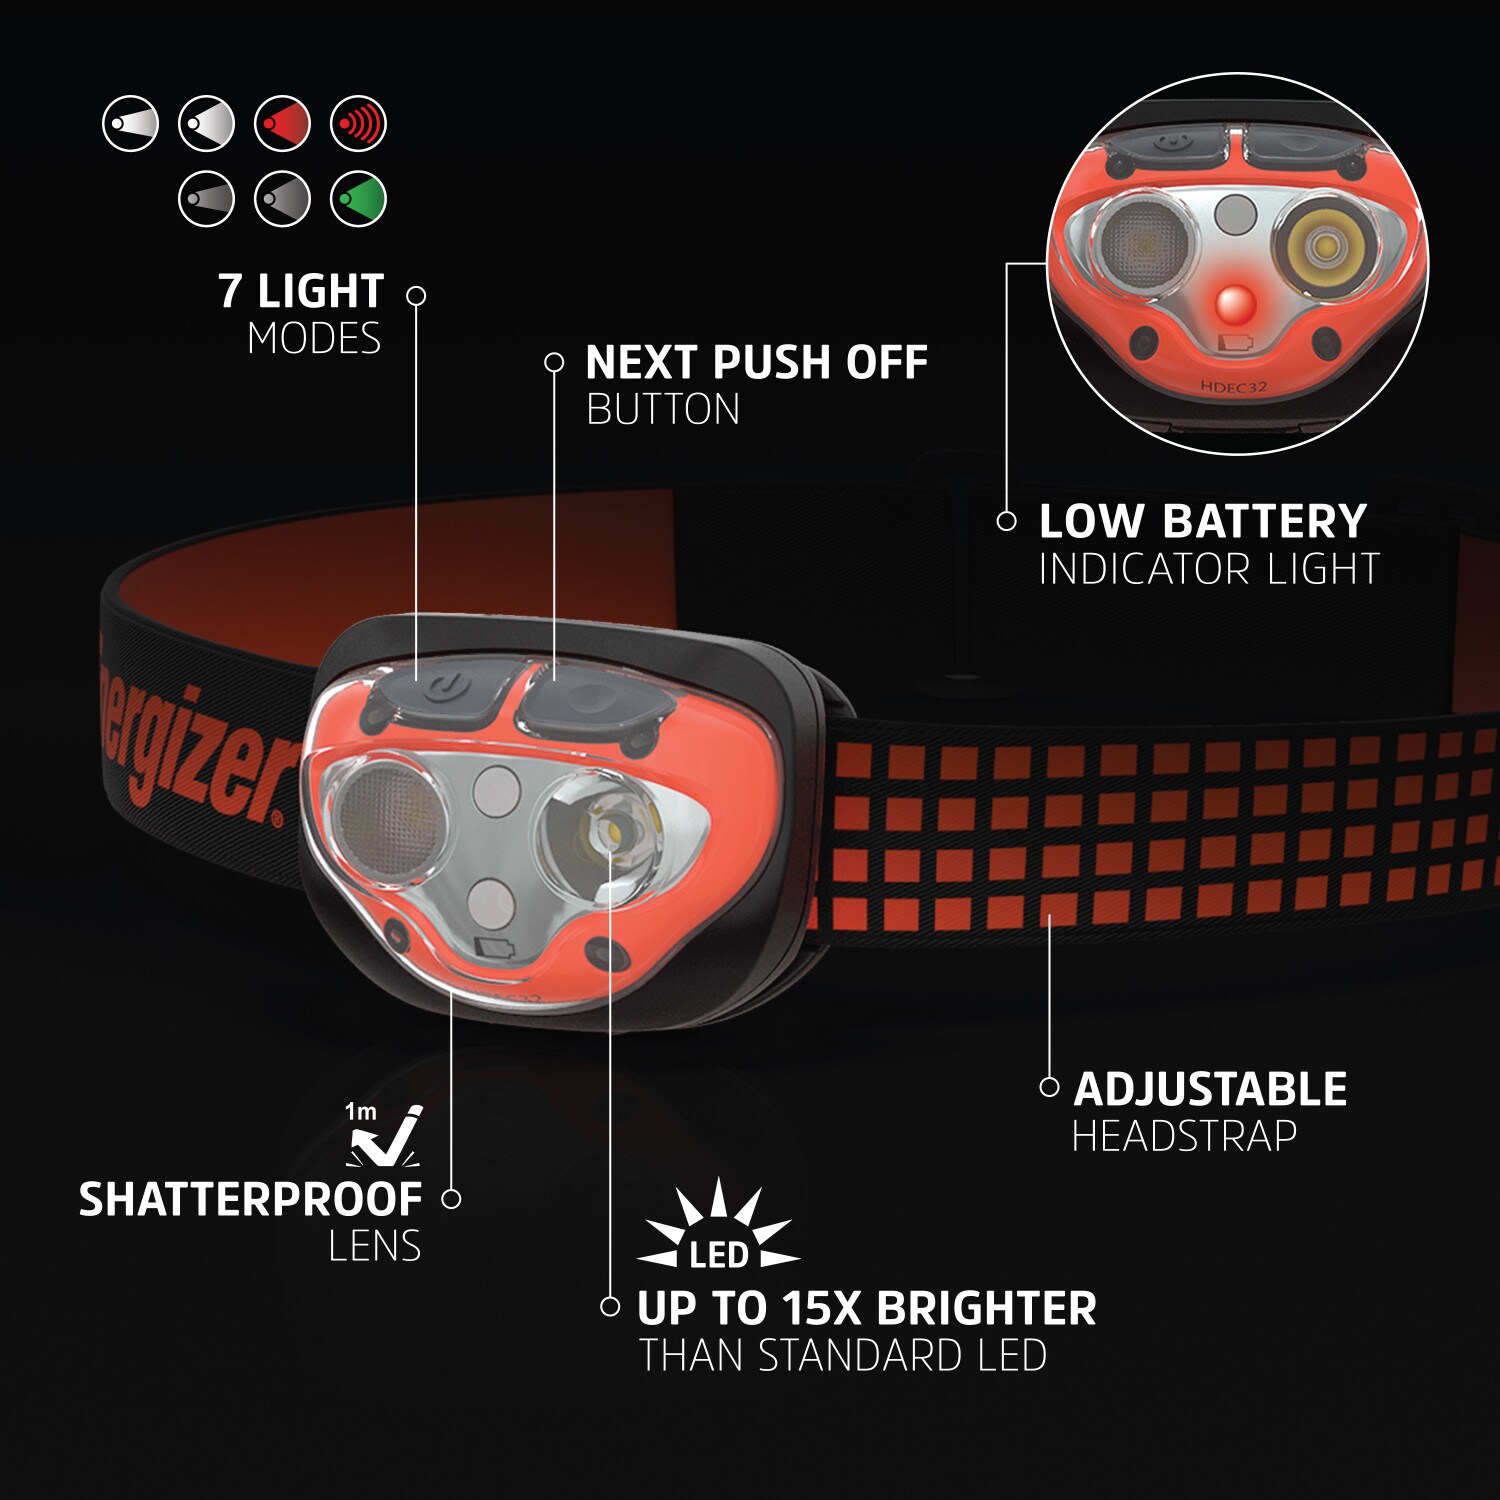 Energizer Vision 450-Lumen Headlamp department the at Headlamps in LED Included) (Battery